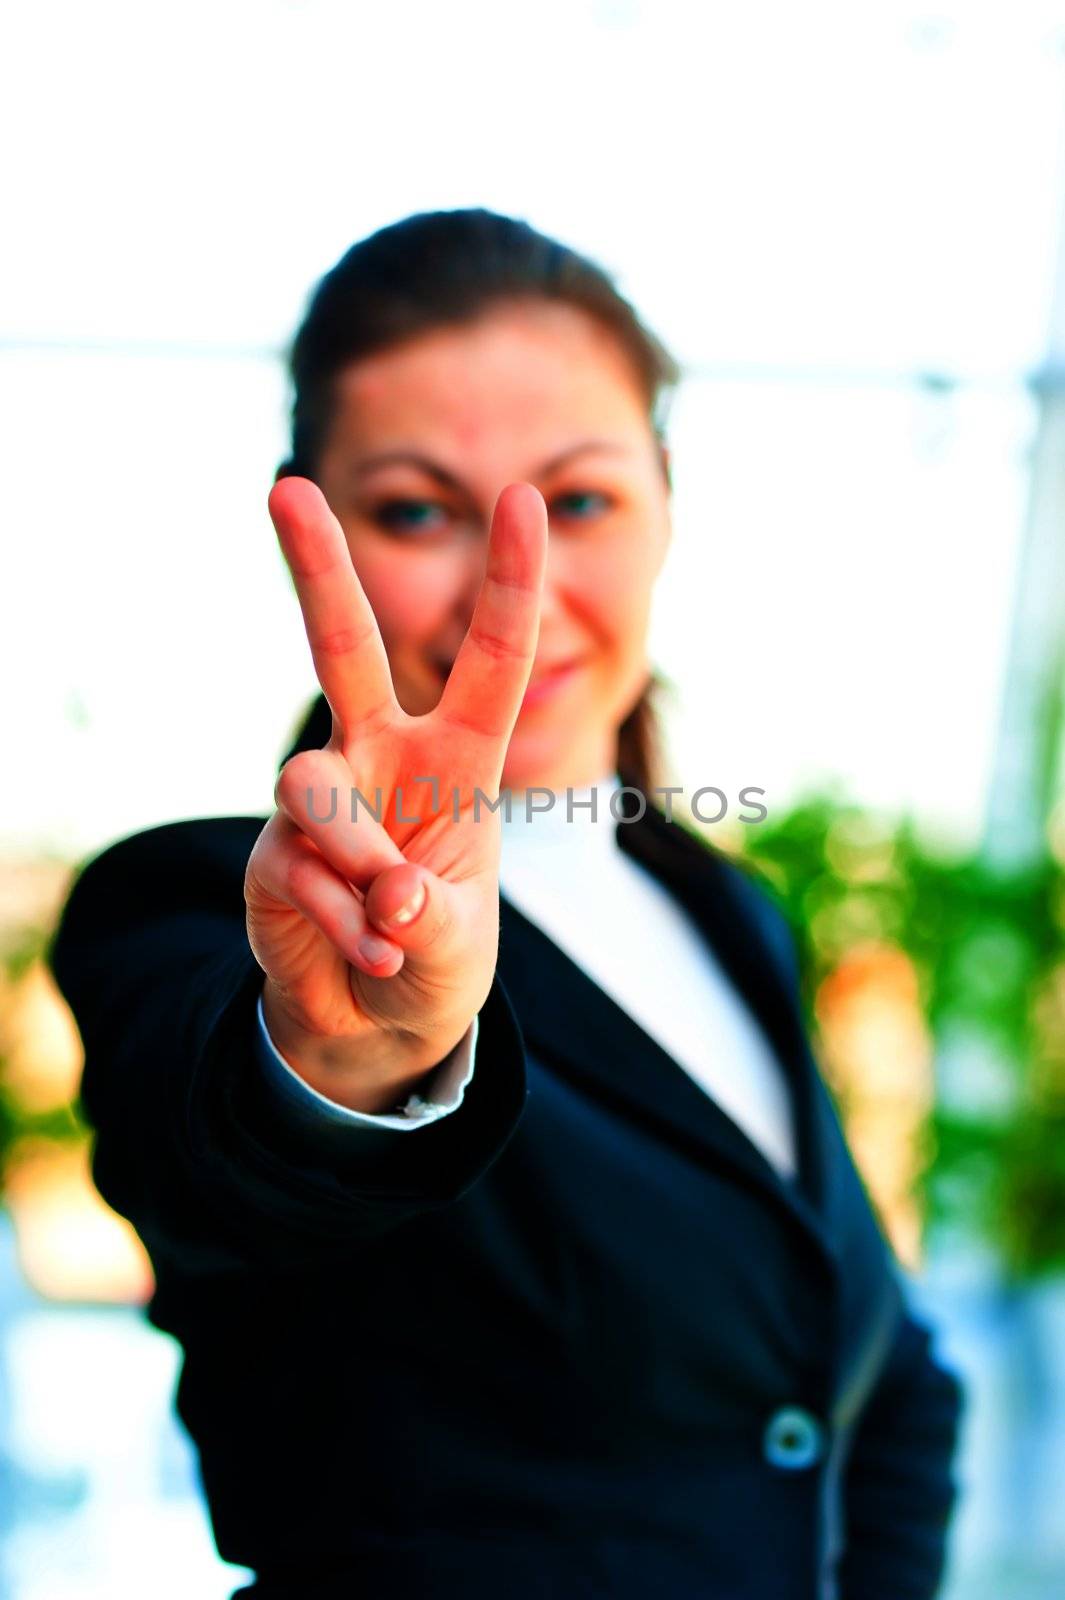 Girl in a business suit showing gesture - victory hand by kosmsos111